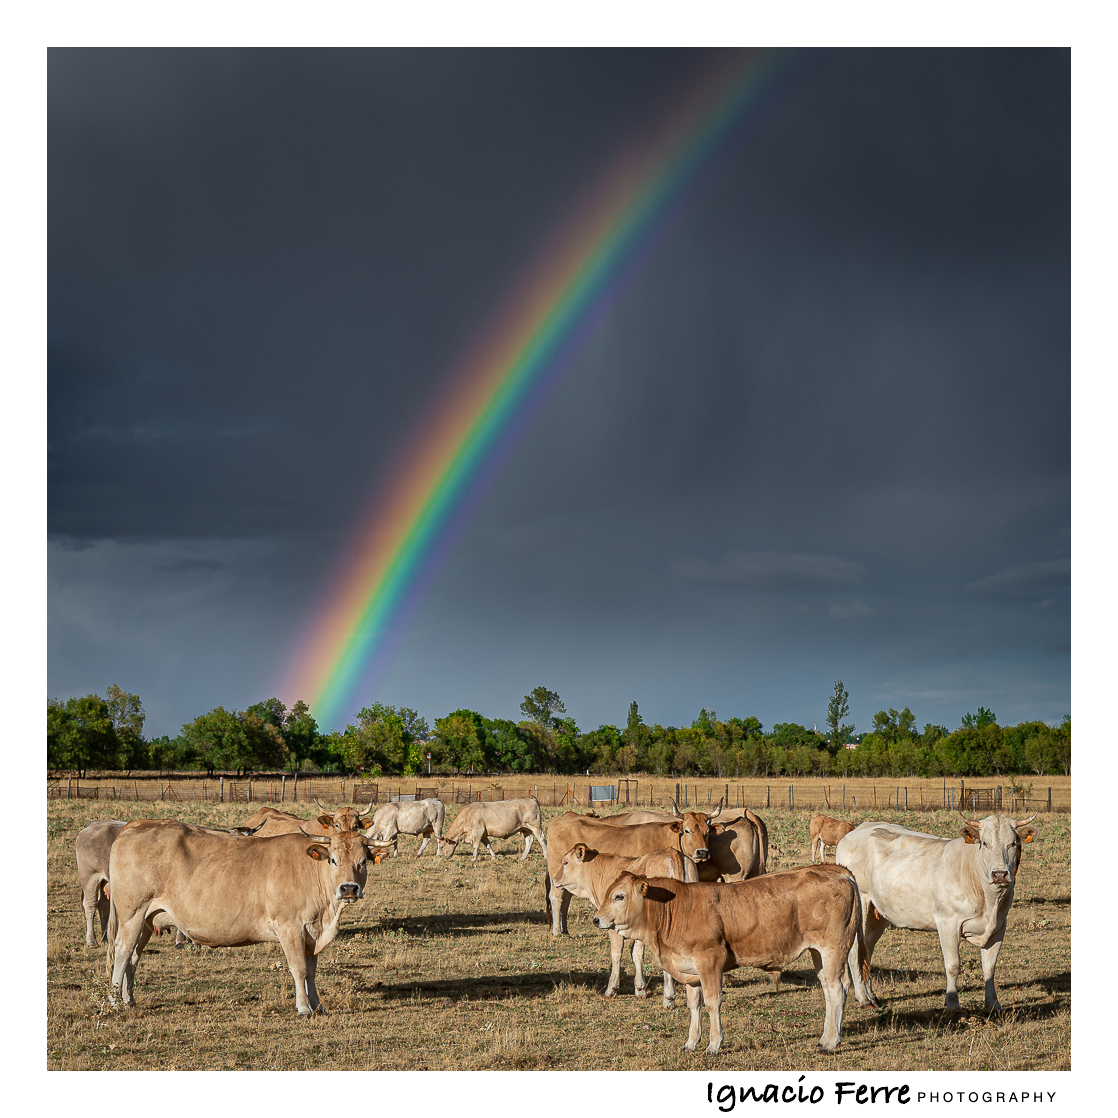 Cows and rainbow